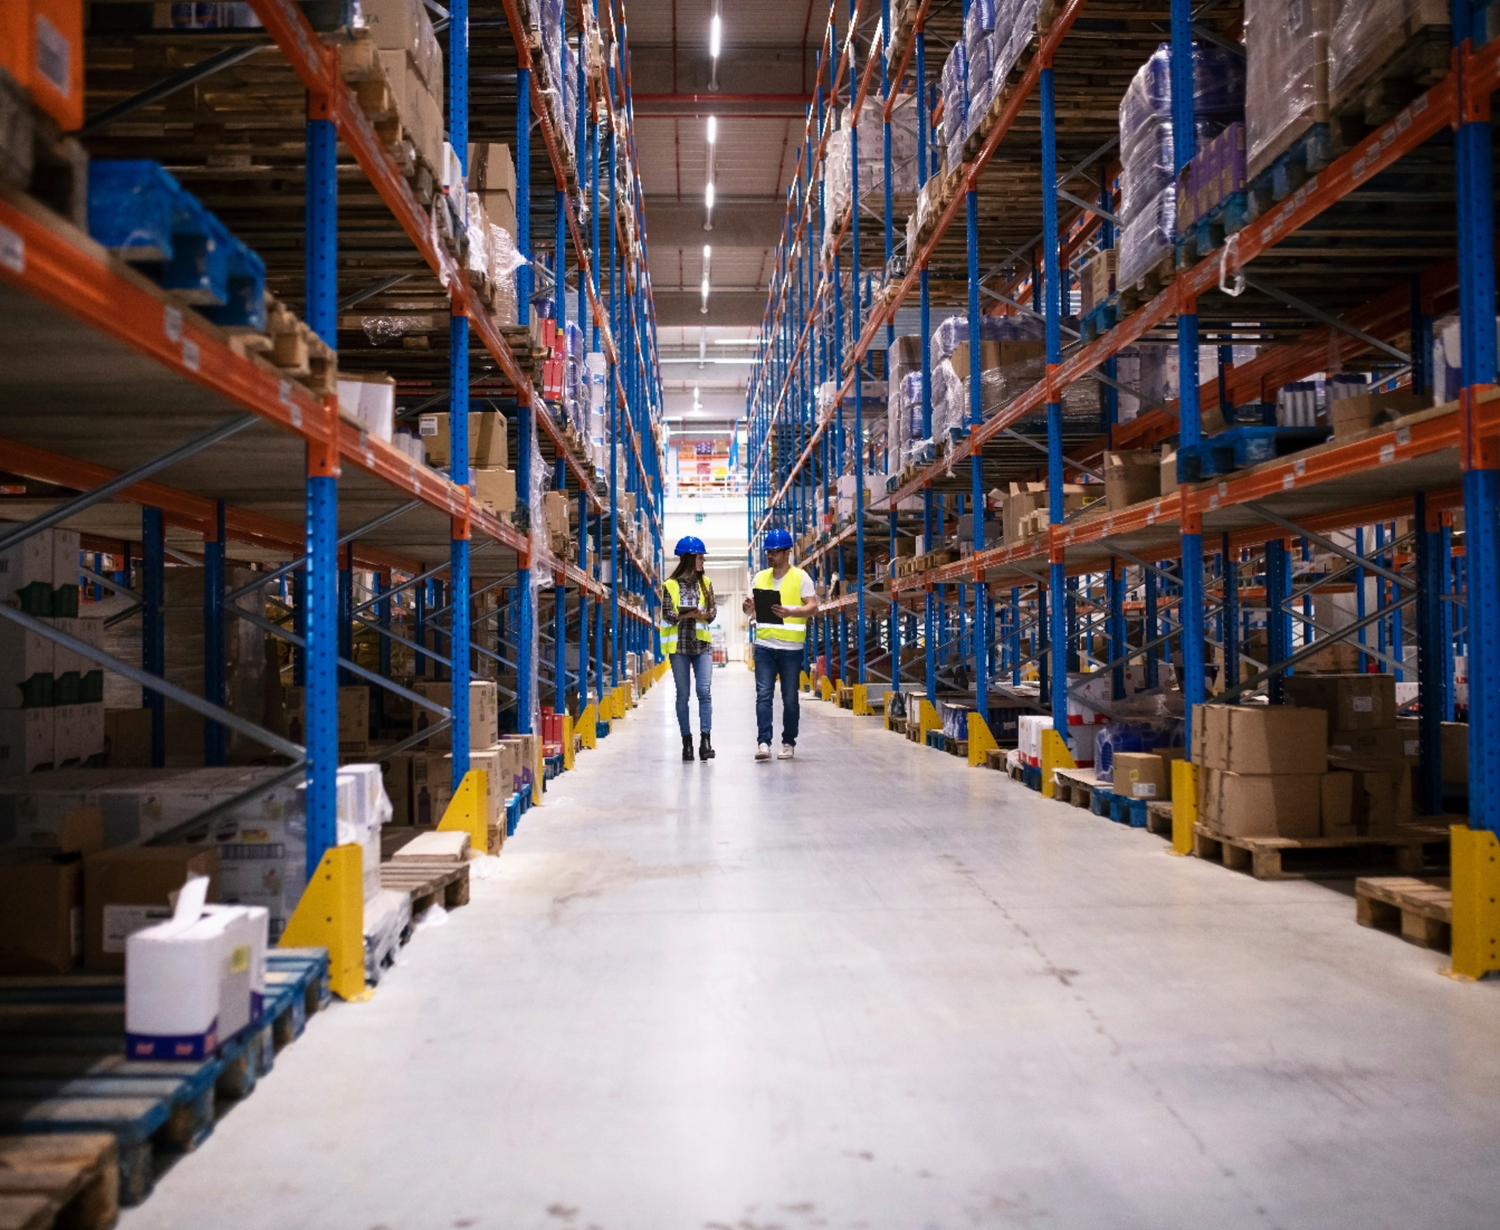 A large warehouse with two employees walking down its aisles